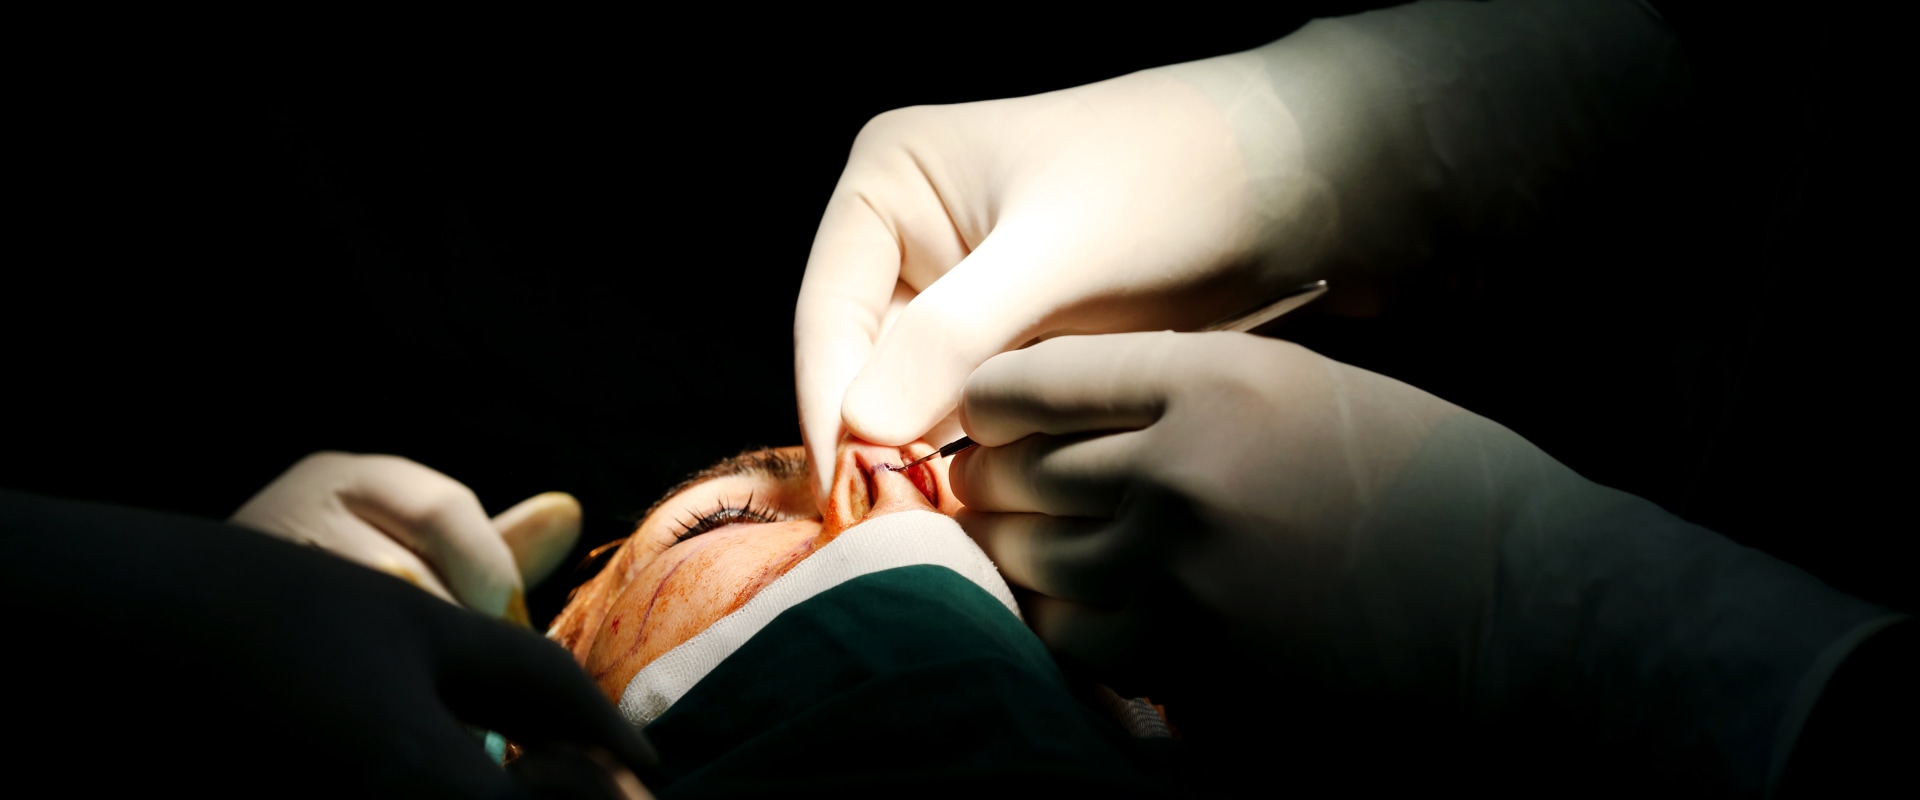 Can Insurance Cover Cosmetic Surgery?